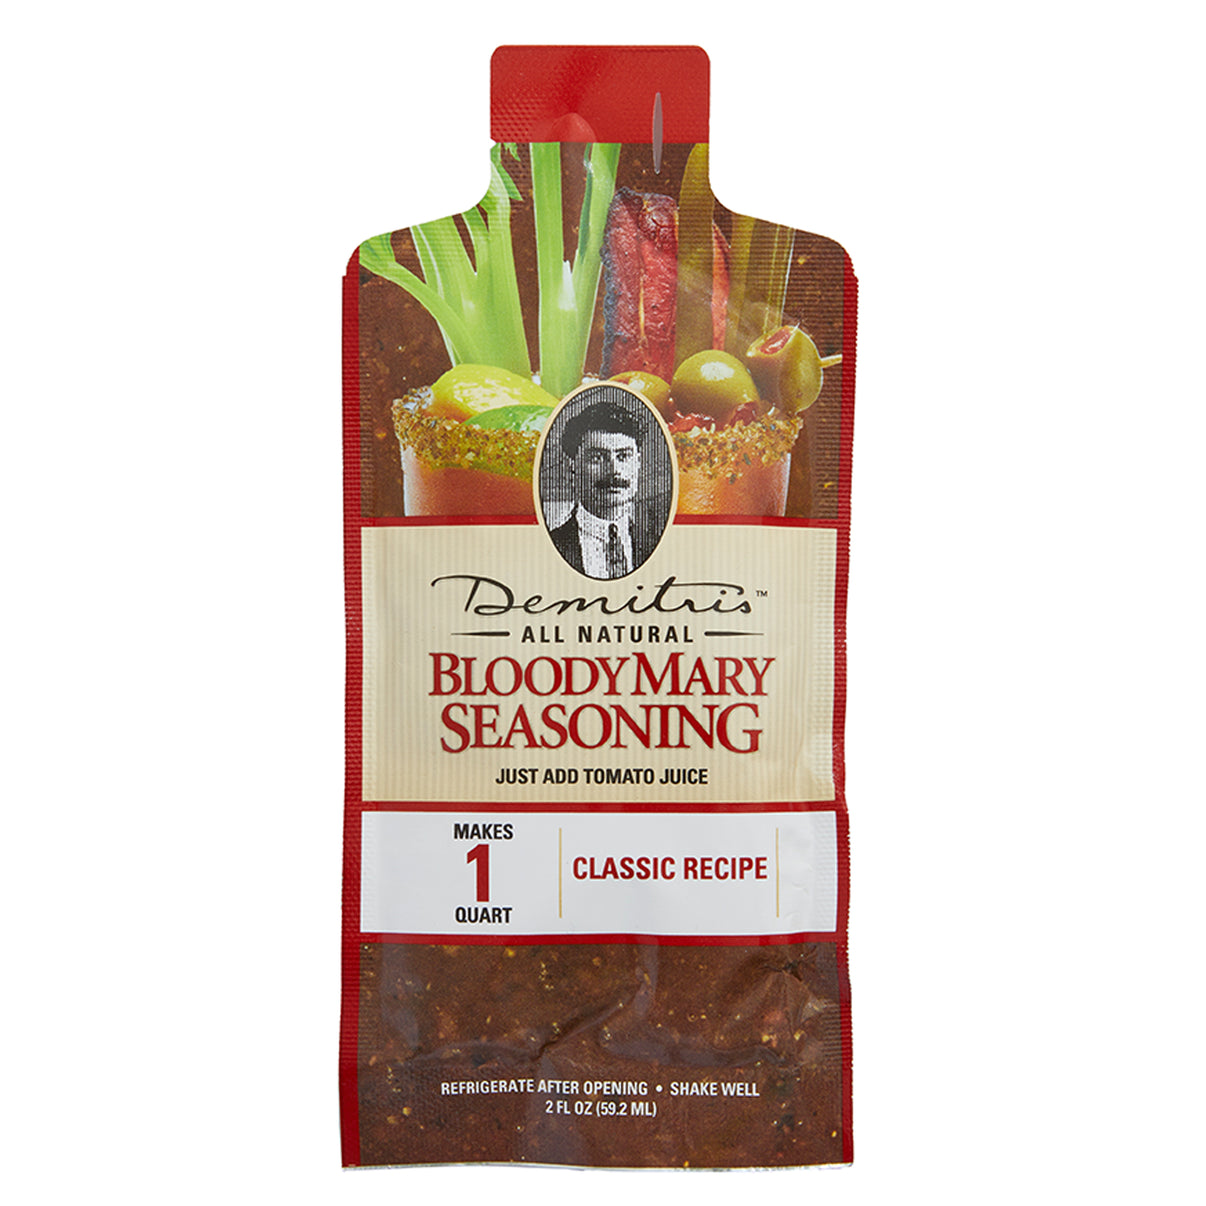 Free Sample of Bloody Mary Seasoning with Free Shipping